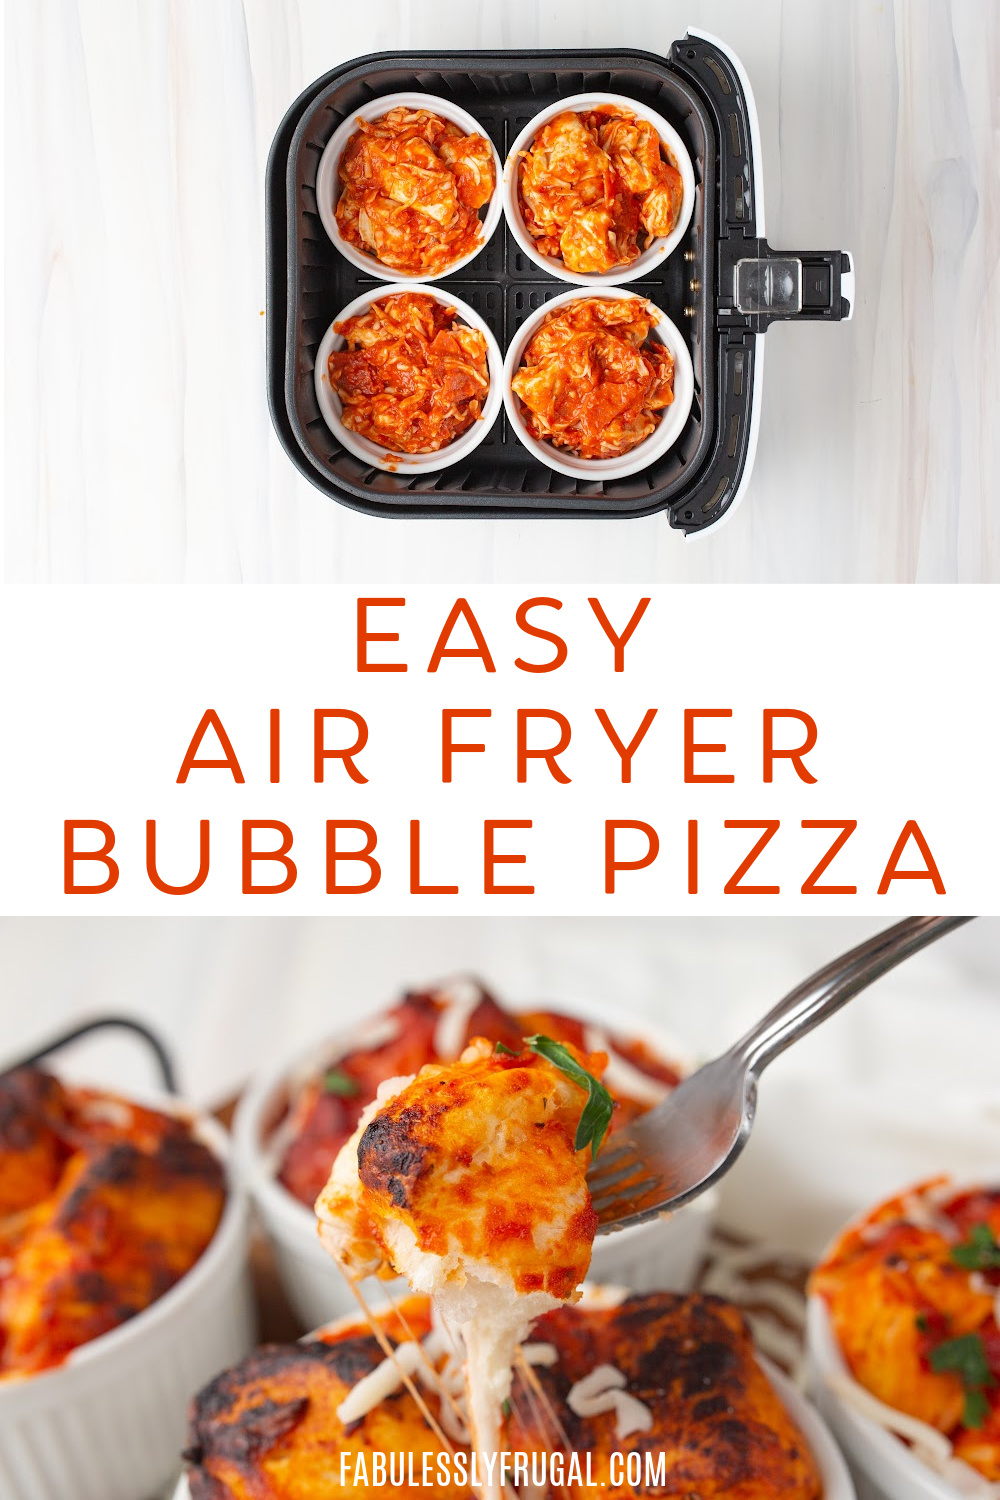 https://fabulesslyfrugal.com/wp-content/uploads/2022/09/how-to-make-bubble-pizza-in-the-air-fryer-1.jpg